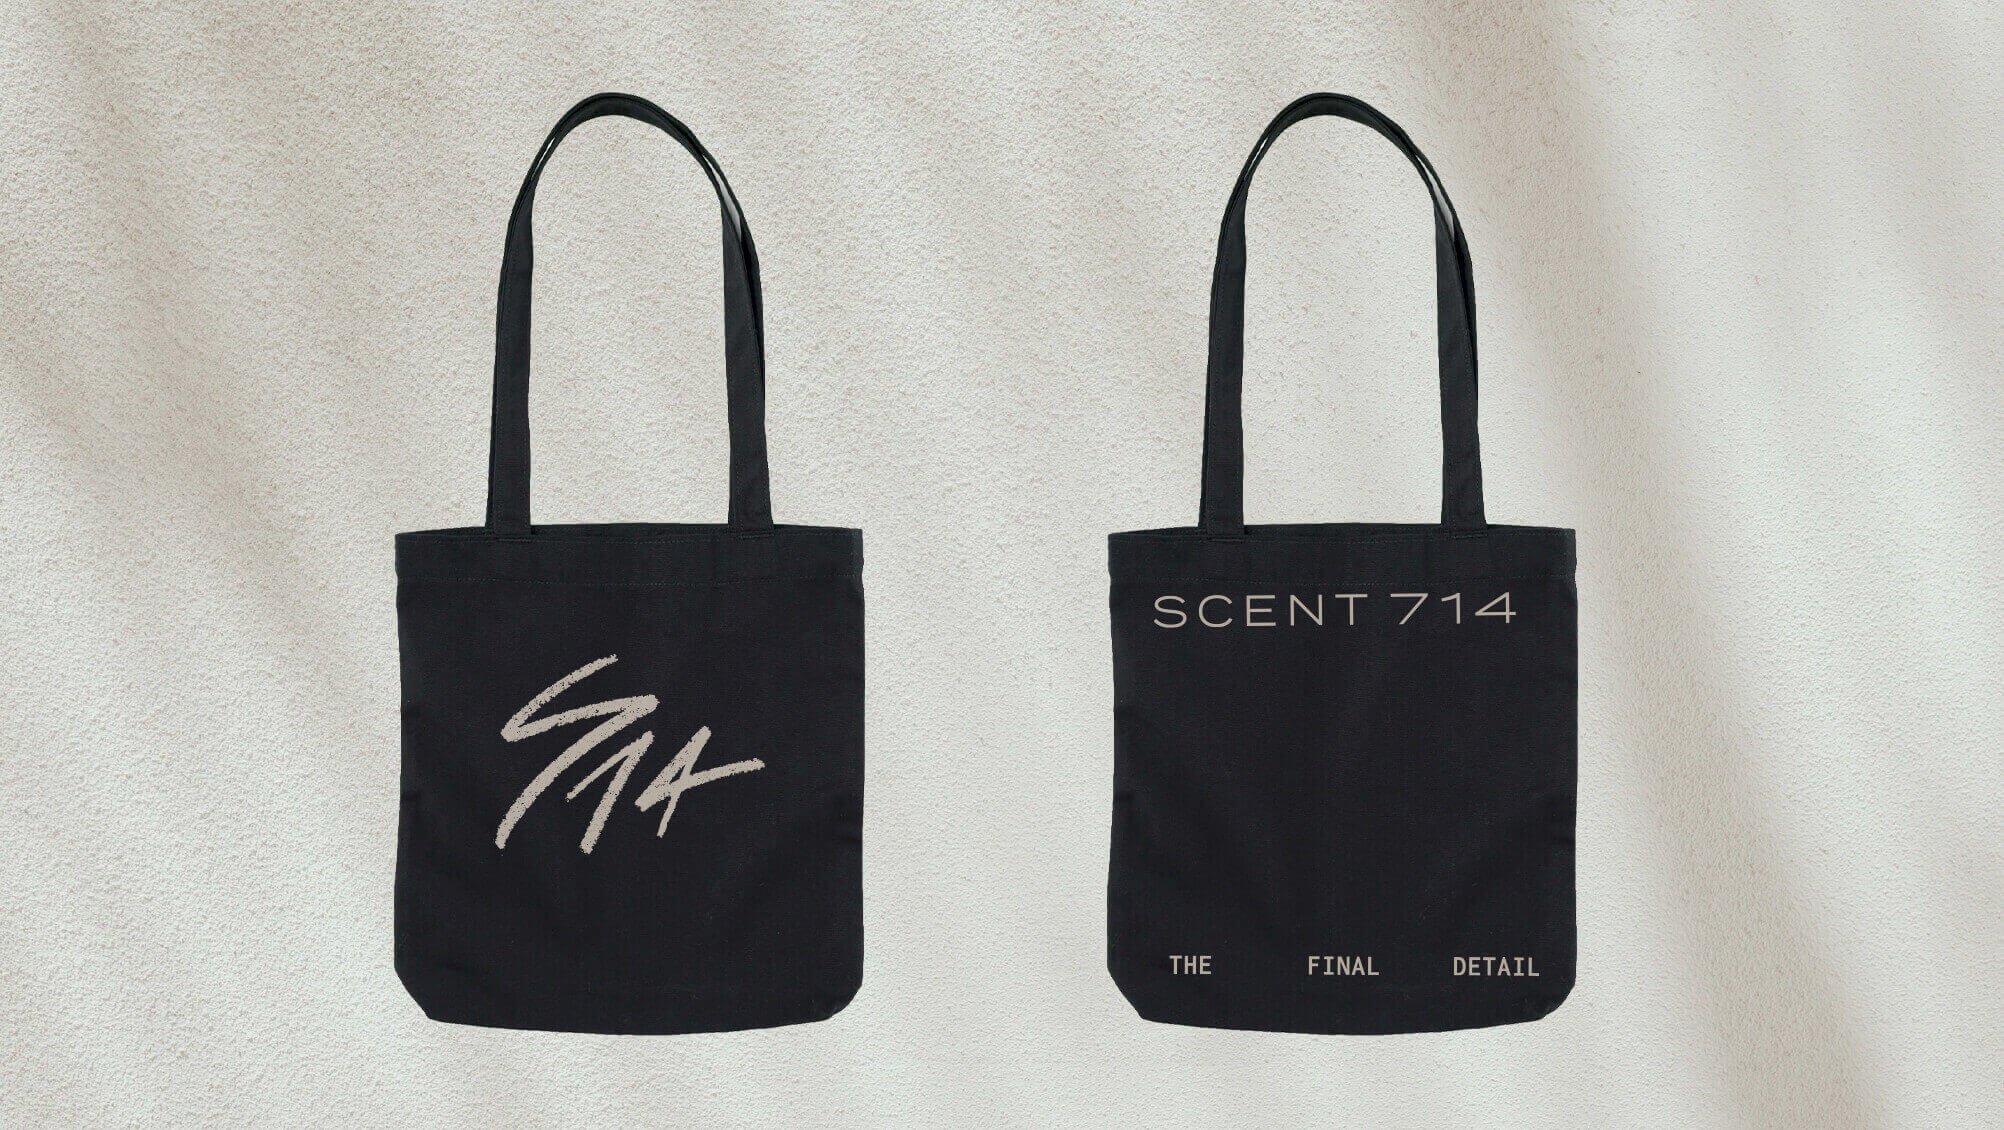 Jacober Creative Brand Identity for Scent 714 Custom Fragrances. Photo of branding on promotional bags.